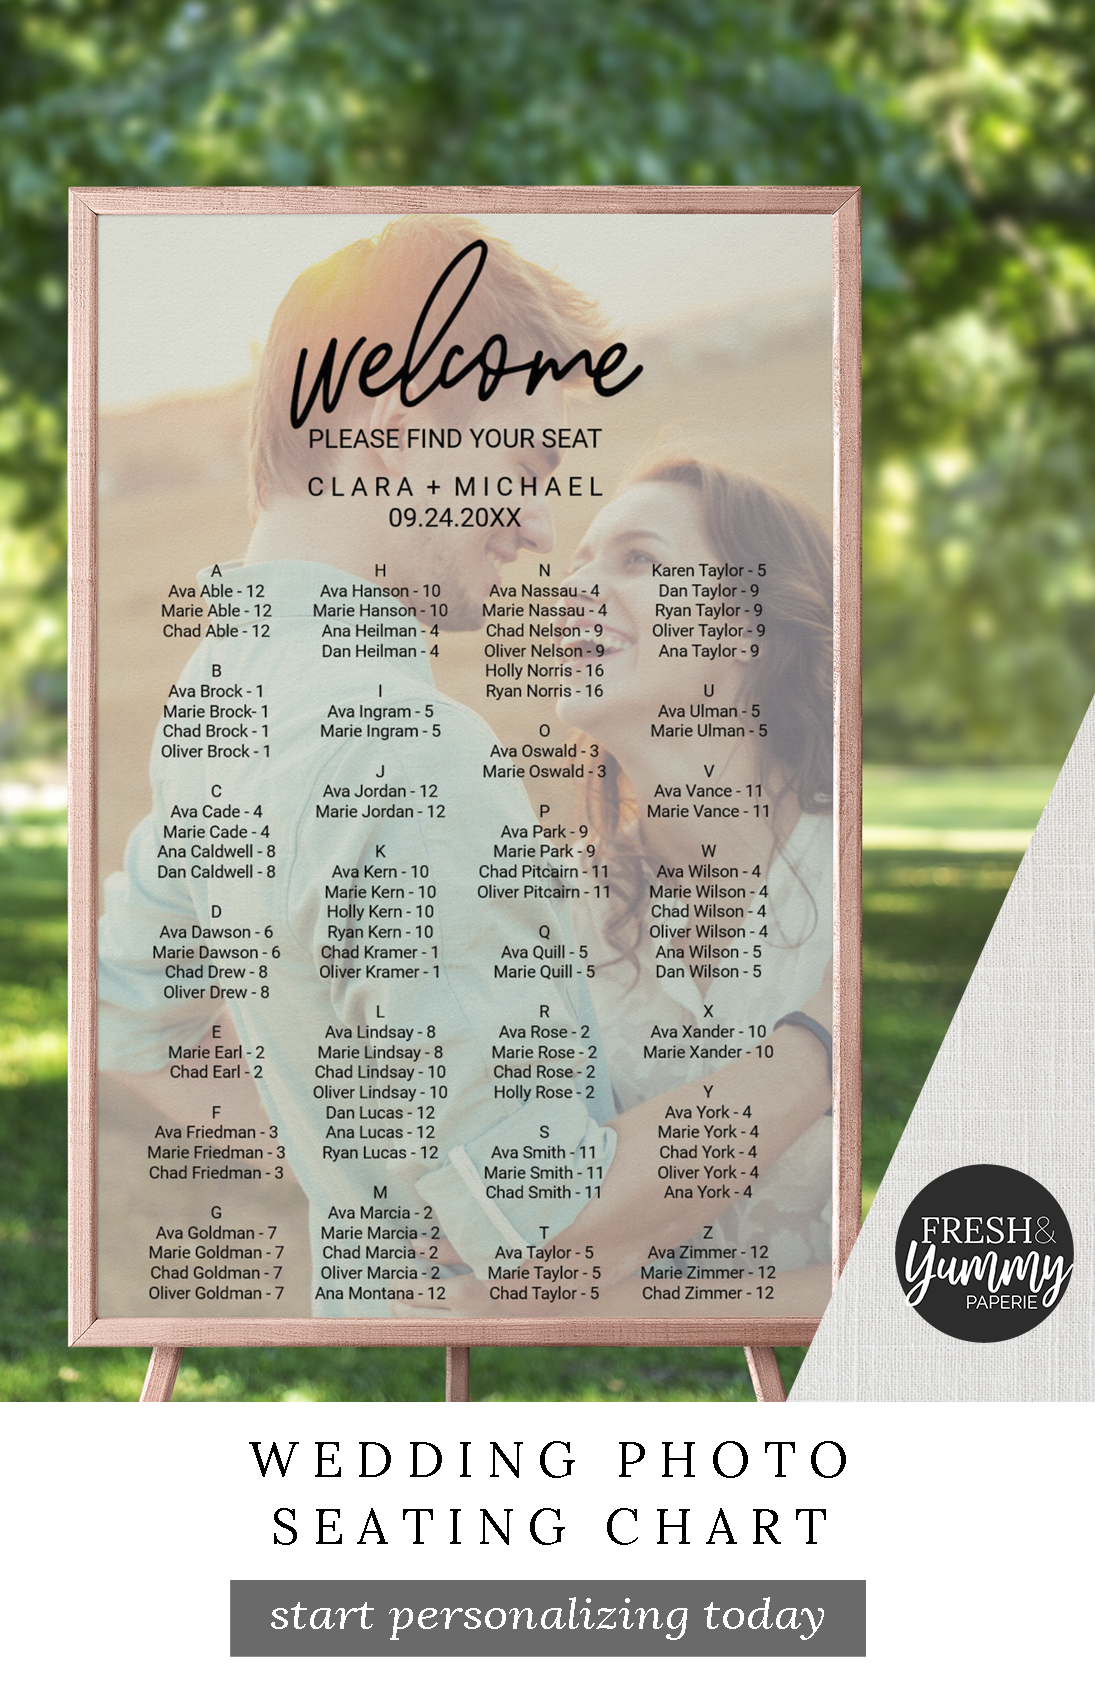 Personalized Wedding Photo Seating Chart by Fresh and Yummy Paperie - Personalized Wedding Photo Seating Chart by Fresh and Yummy Paperie -   25 diy Wedding seating chart ideas